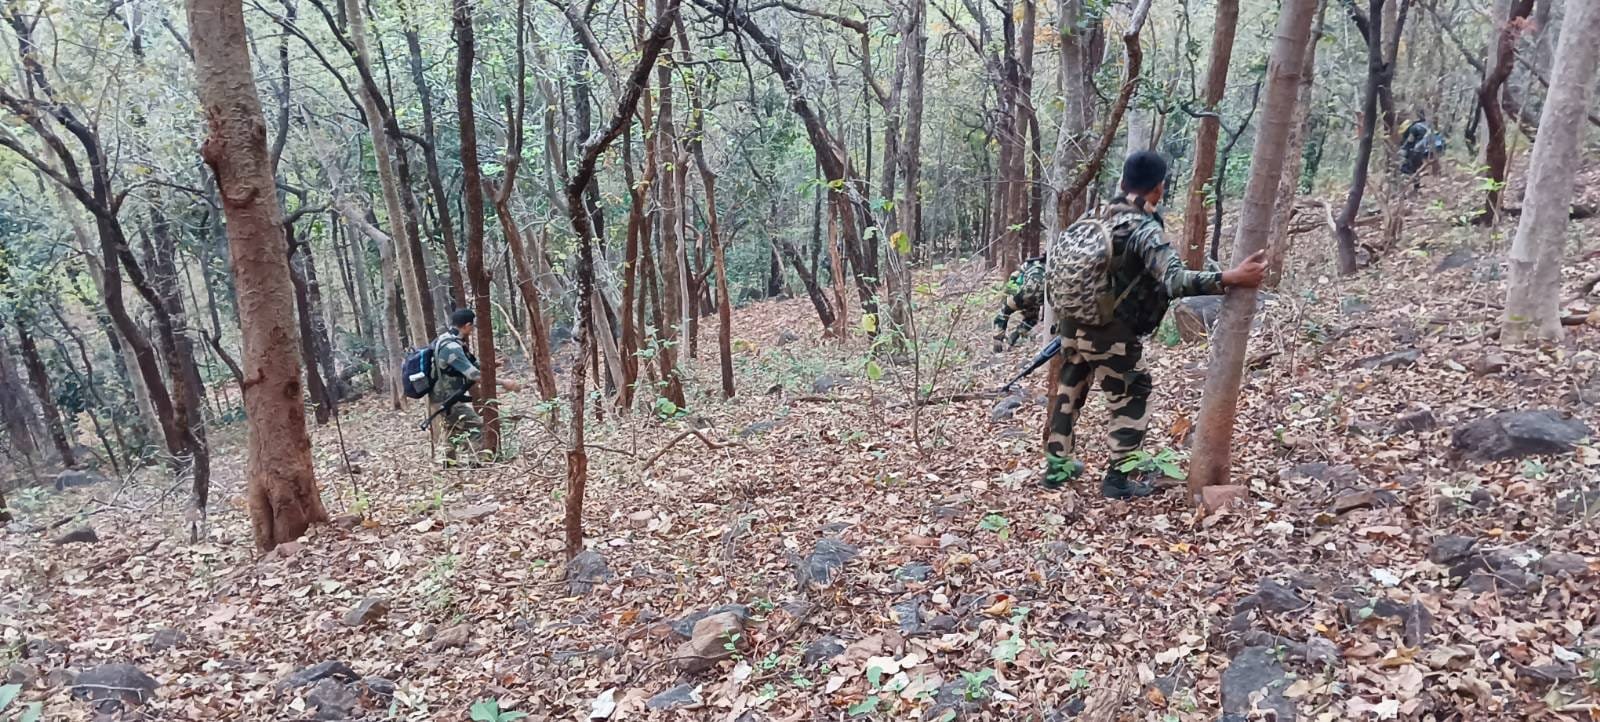 Surgical Strike On Naxalism: This is how the soldiers carried out the biggest 'surgical strike' by entering the den of dreaded Naxalites.